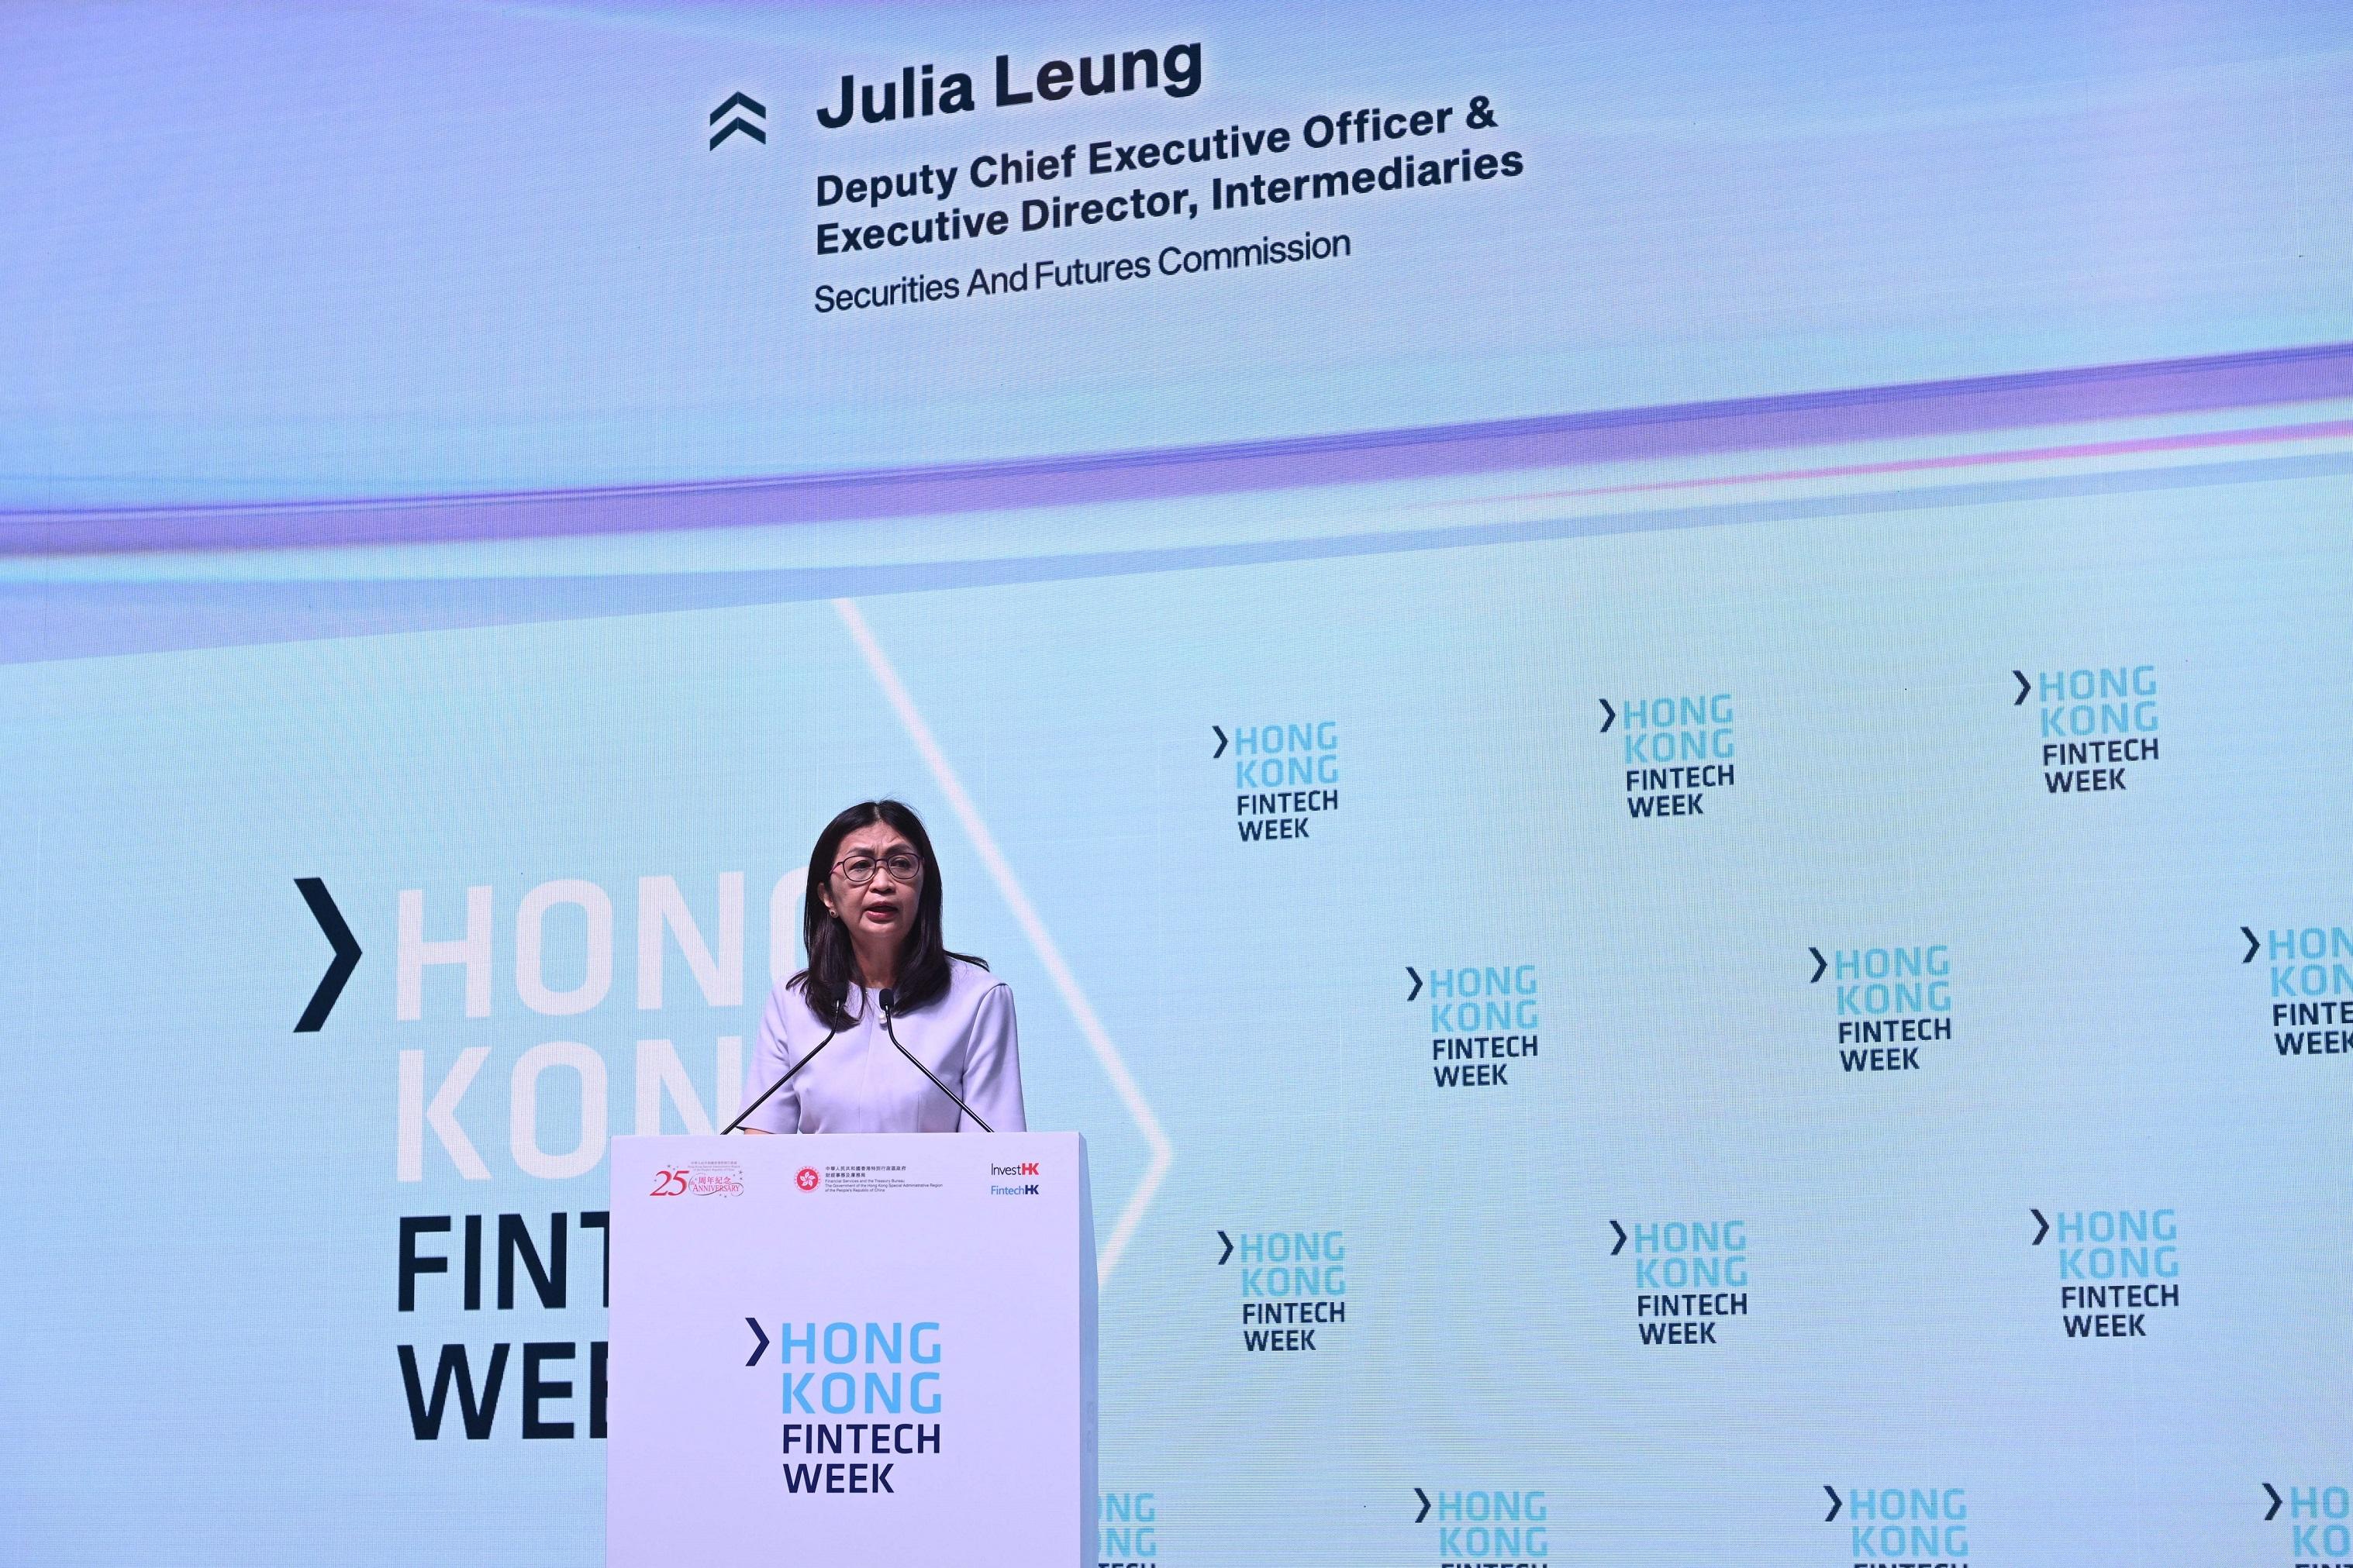 The five-day Hong Kong FinTech Week 2022 attracted over 30 000 visitors and more than five million online views from over 95 economies. Photo shows the Deputy Chief Executive Officer and Executive Director, Intermediaries, Securities and Futures Commission, Ms Julia Leung, reinforcing the regulator's support for Web3 technology and underlining the need to protect investors at the same time.  